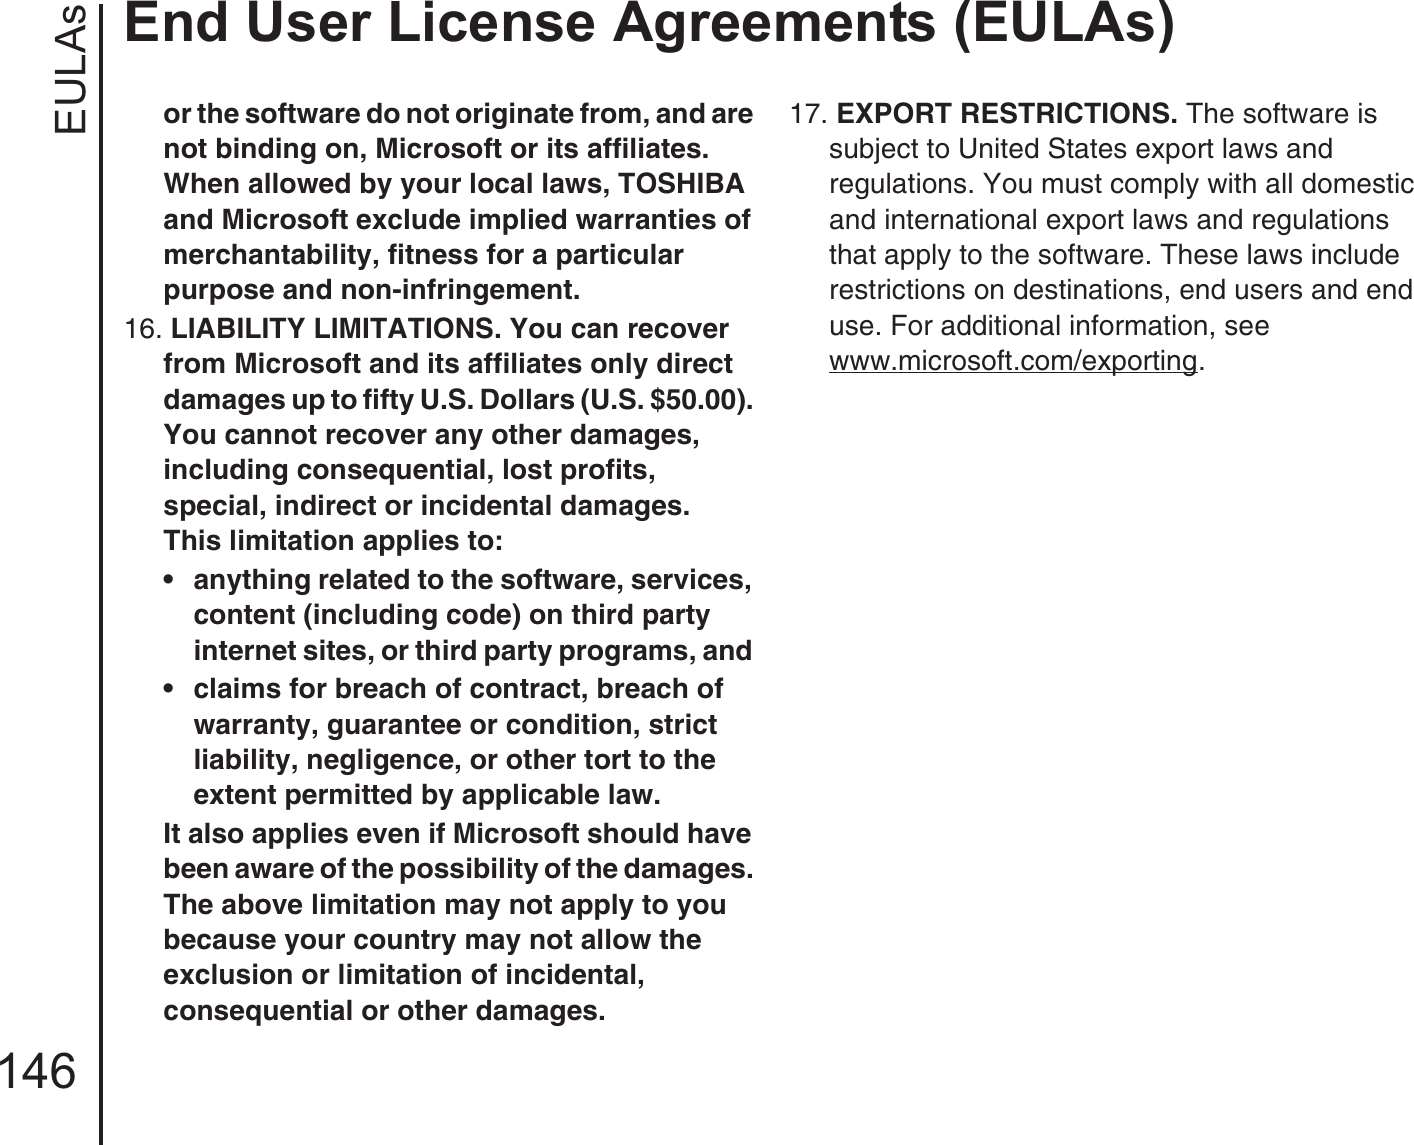 EULAsEnd User License Agreements (EULAs)146or the software do not originate from, and are not binding on, Microsoft or its affiliates. When allowed by your local laws, TOSHIBA and Microsoft exclude implied warranties of merchantability, fitness for a particular purpose and non-infringement. 16. LIABILITY LIMITATIONS. You can recover from Microsoft and its affiliates only direct damages up to fifty U.S. Dollars (U.S. $50.00). You cannot recover any other damages, including consequential, lost profits, special, indirect or incidental damages.This limitation applies to: • anything related to the software, services, content (including code) on third party internet sites, or third party programs, and • claims for breach of contract, breach of warranty, guarantee or condition, strict liability, negligence, or other tort to the extent permitted by applicable law.It also applies even if Microsoft should have been aware of the possibility of the damages. The above limitation may not apply to you because your country may not allow the exclusion or limitation of incidental, consequential or other damages.17. EXPORT RESTRICTIONS. The software is subject to United States export laws and regulations. You must comply with all domestic and international export laws and regulations that apply to the software. These laws include restrictions on destinations, end users and end use. For additional information, see www.microsoft.com/exporting.